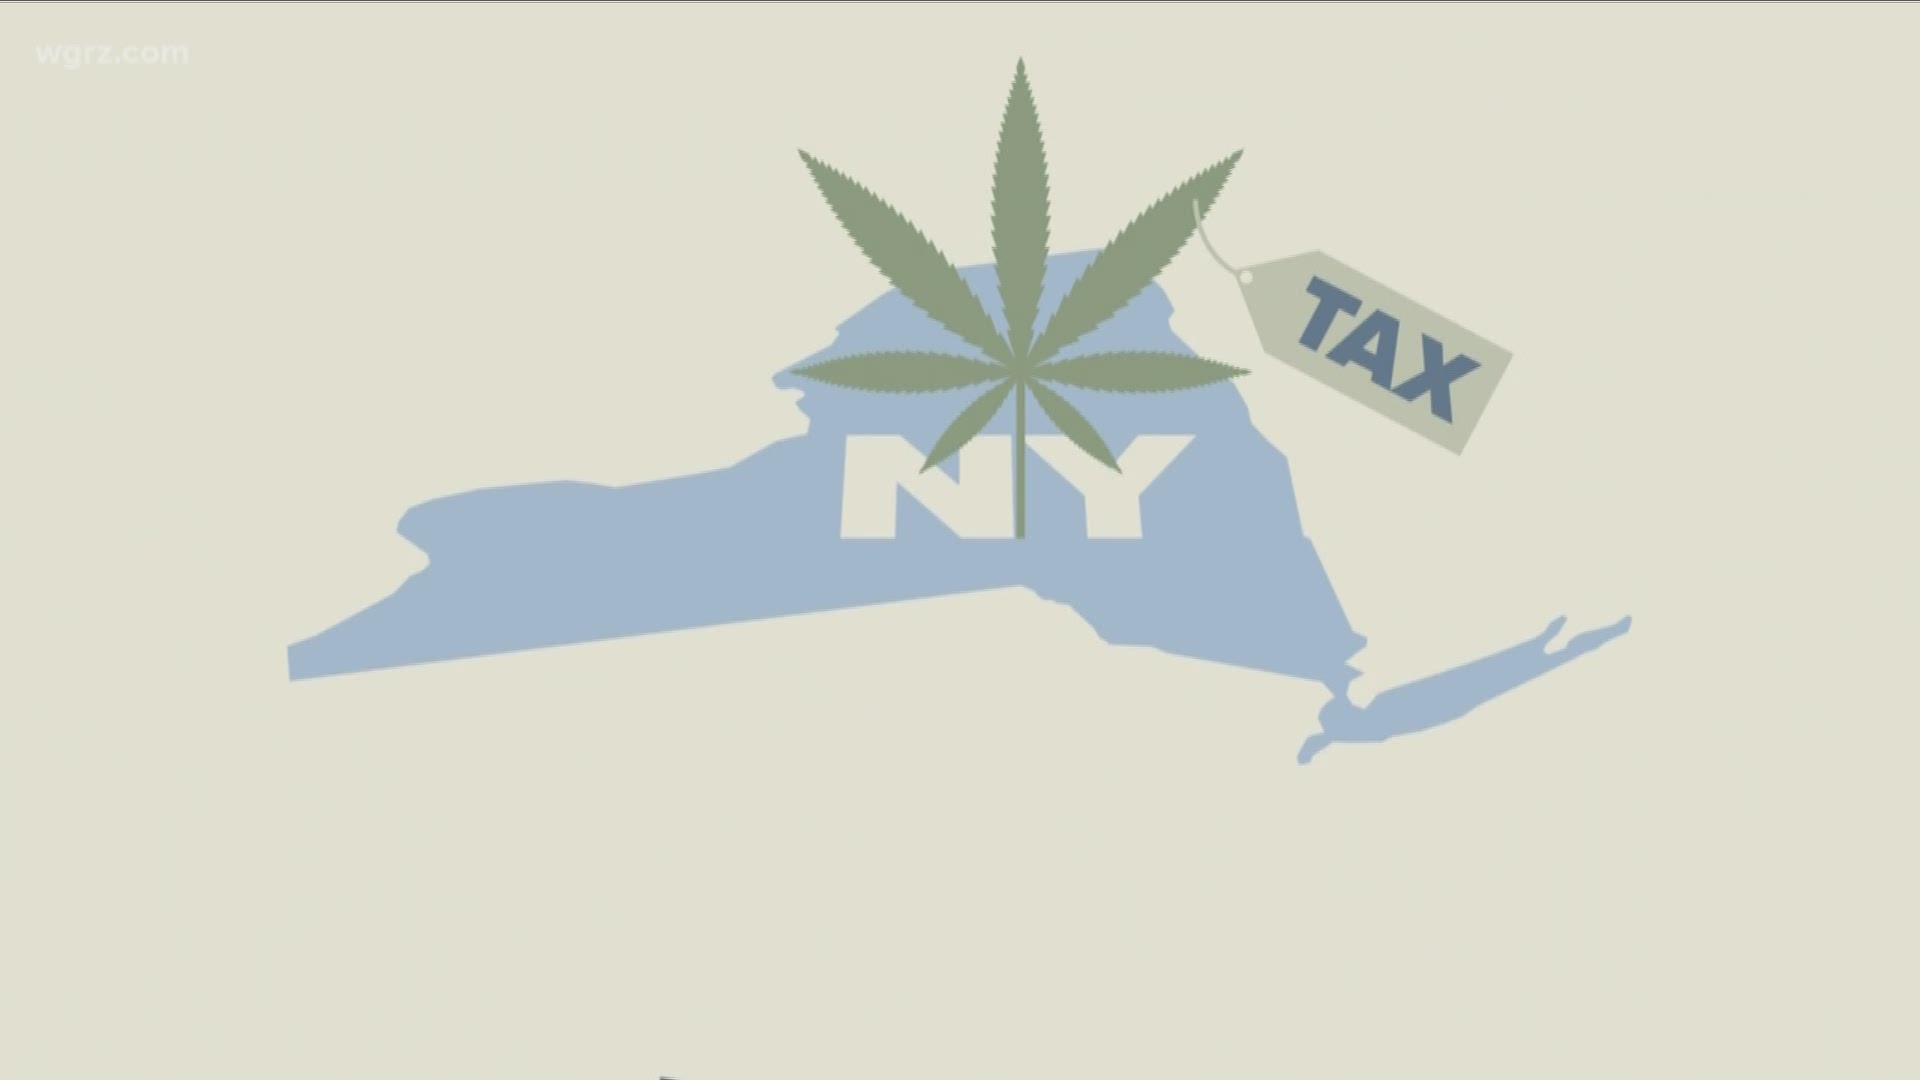 If New York green-lights recreational marijuana - what else comes with that?